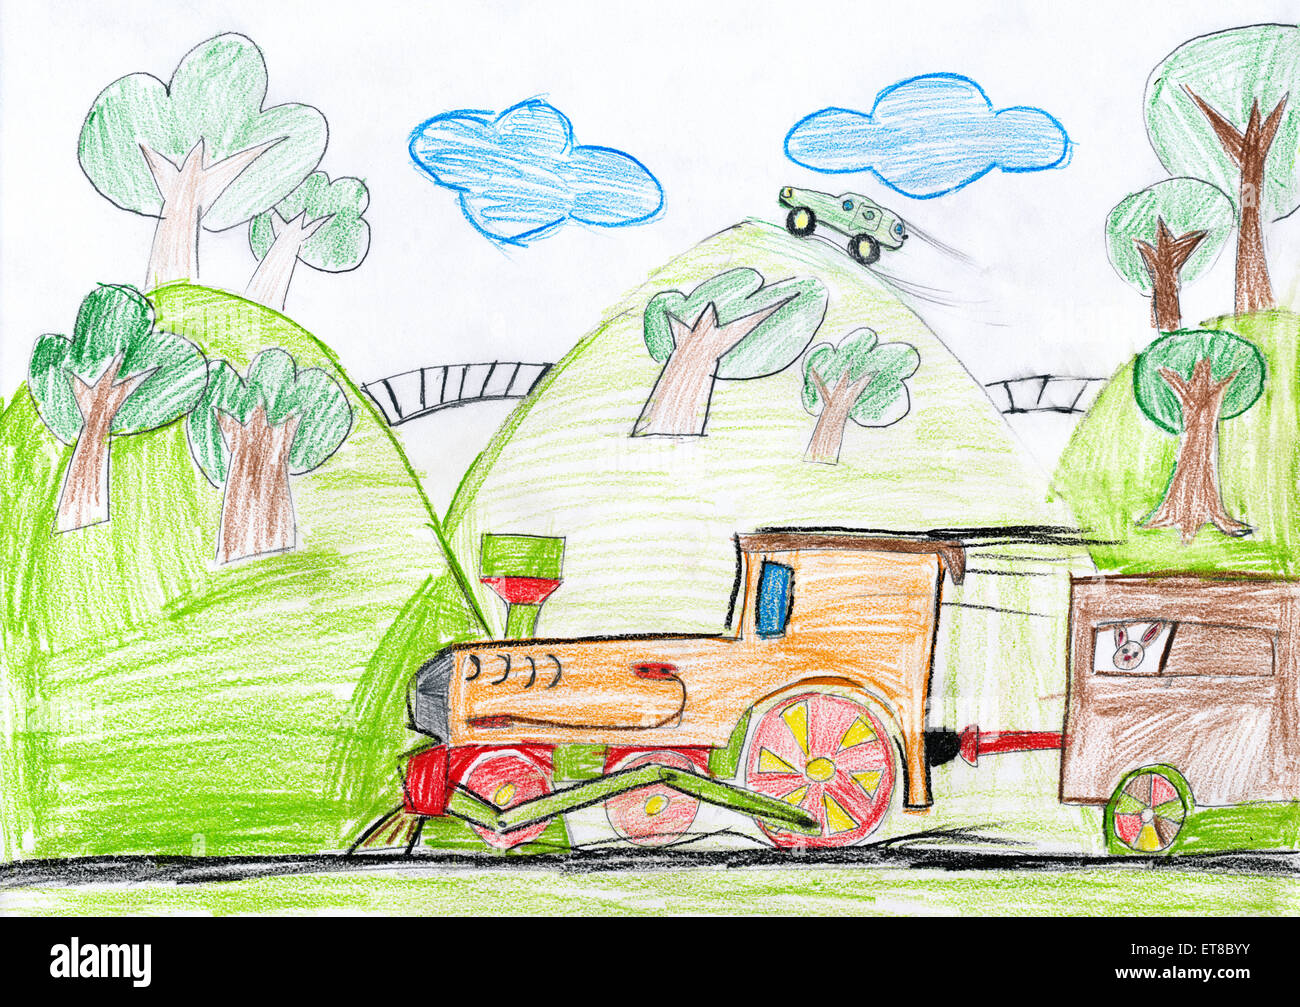 beautiful scenery drawing for kids in simple steps - YouTube-saigonsouth.com.vn